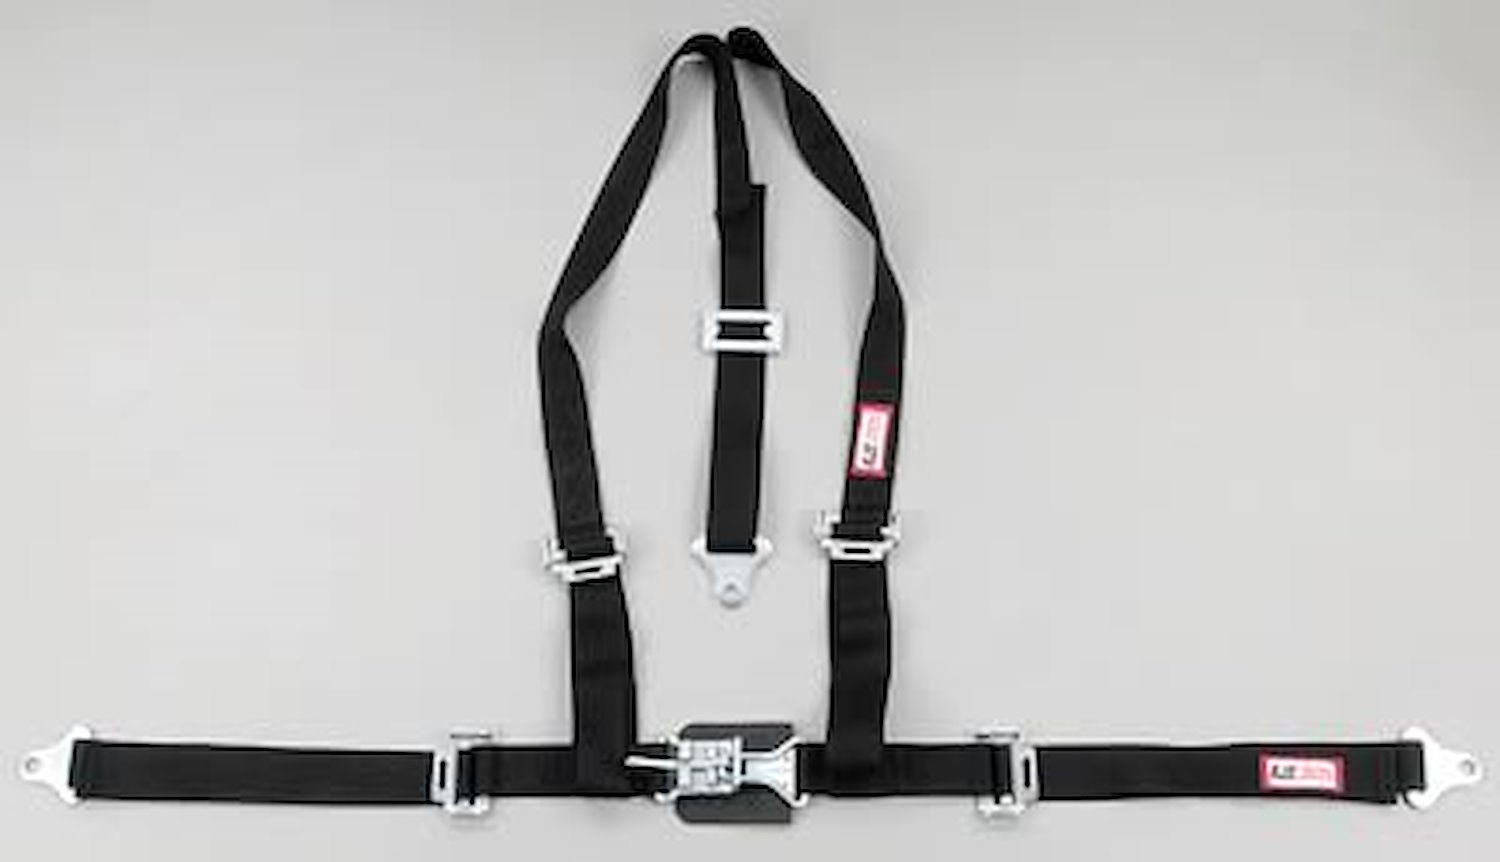 NON-SFI L&L HARNESS 2 PULL UP Lap Belt w/Adjuster 2 S.H. Individual FLOOR MOUNT w/STERNUM STRAP ALL WRAP ENDS BLACK